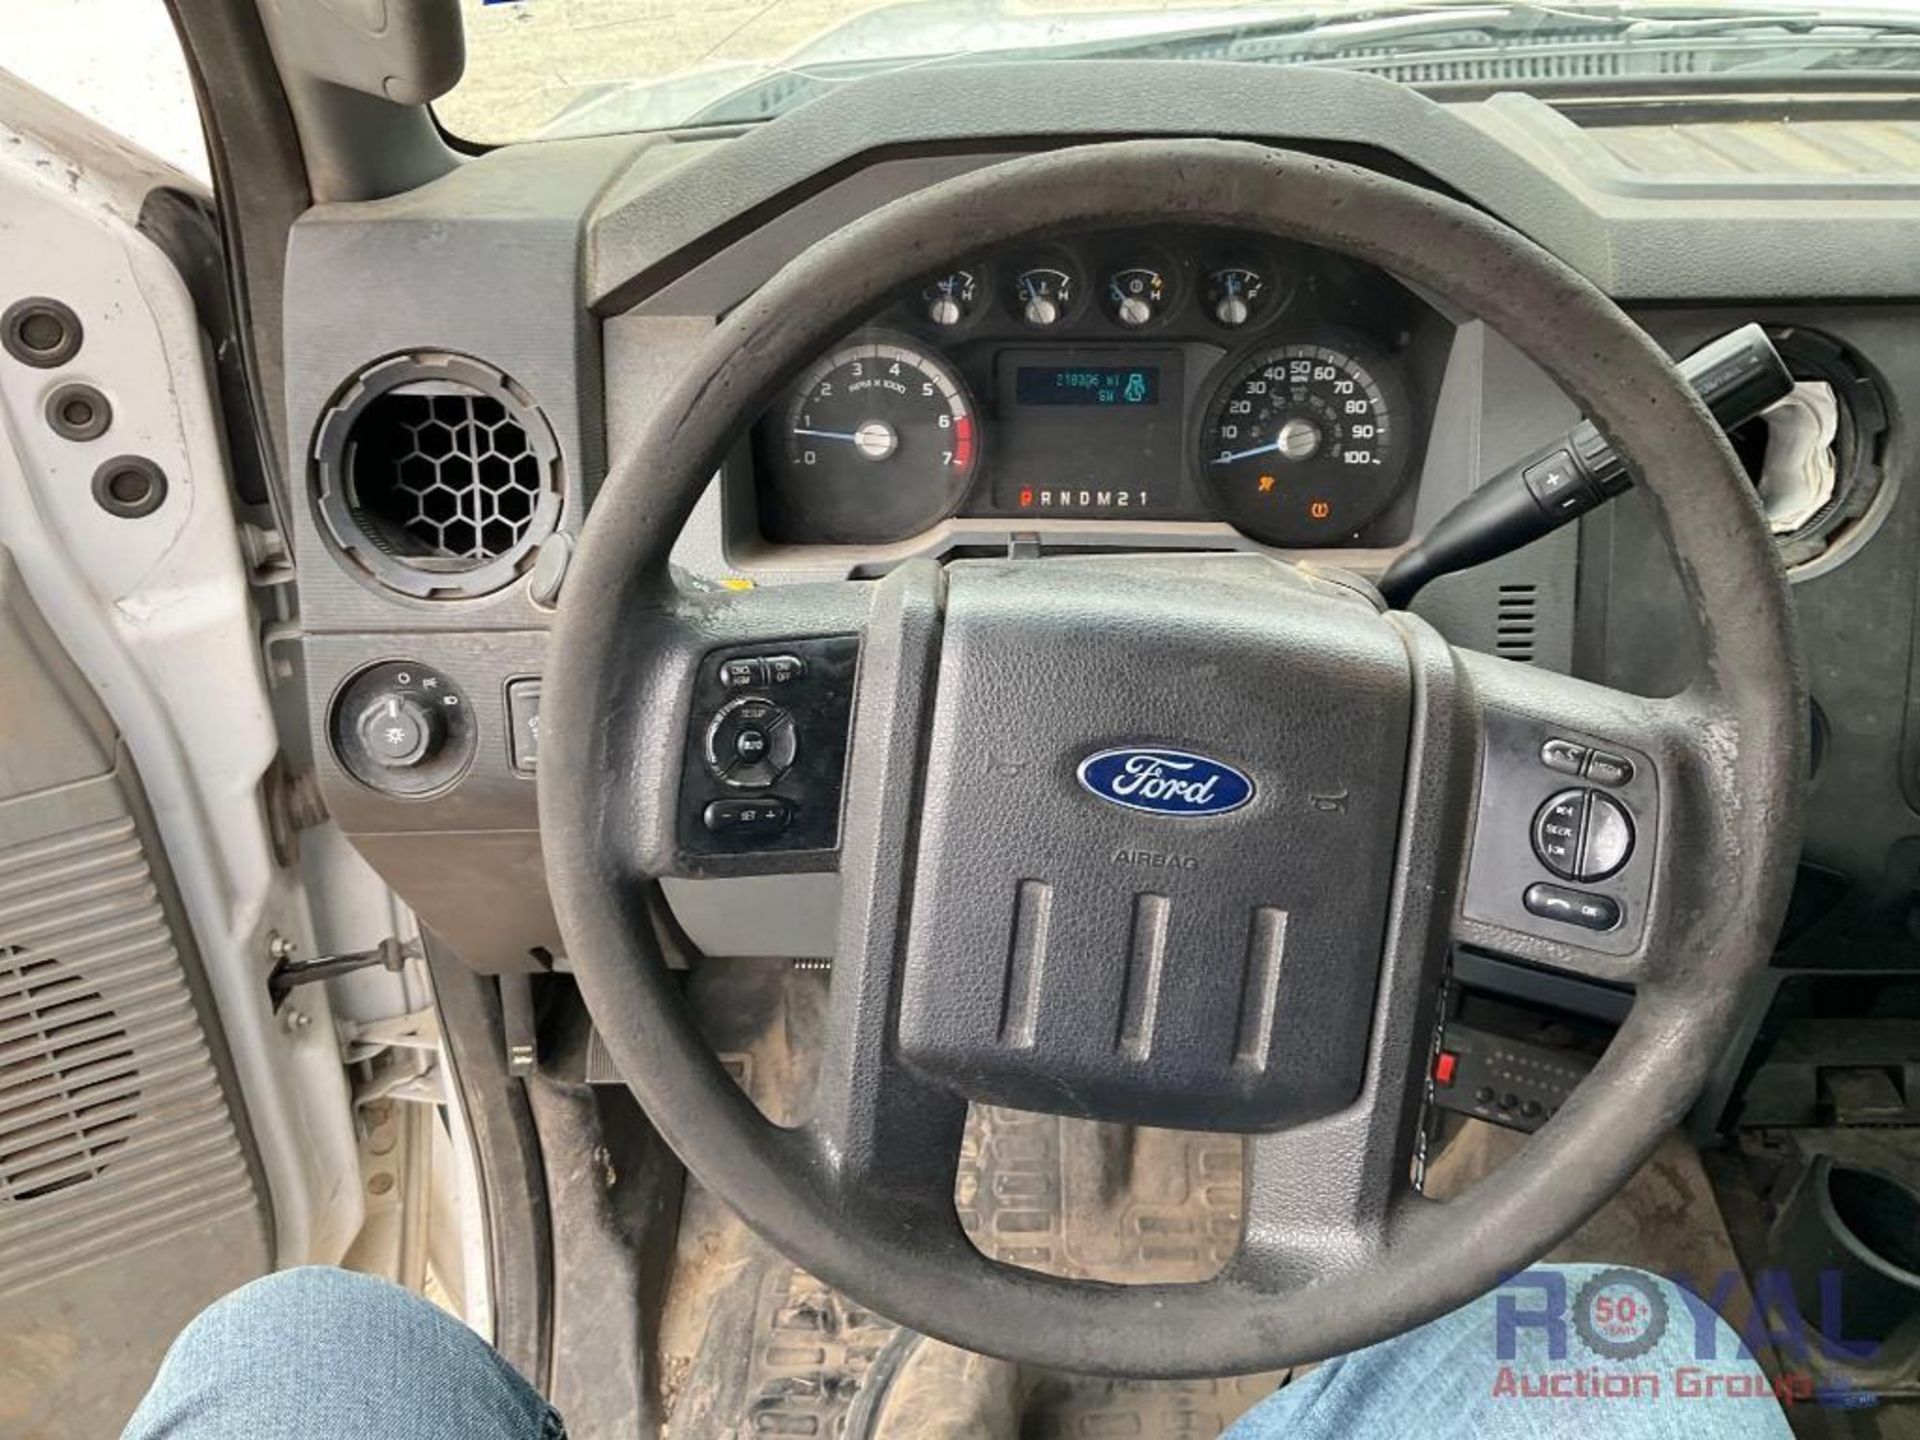 2016 Ford F250 Crew Cab Pickup Truck - Image 20 of 25